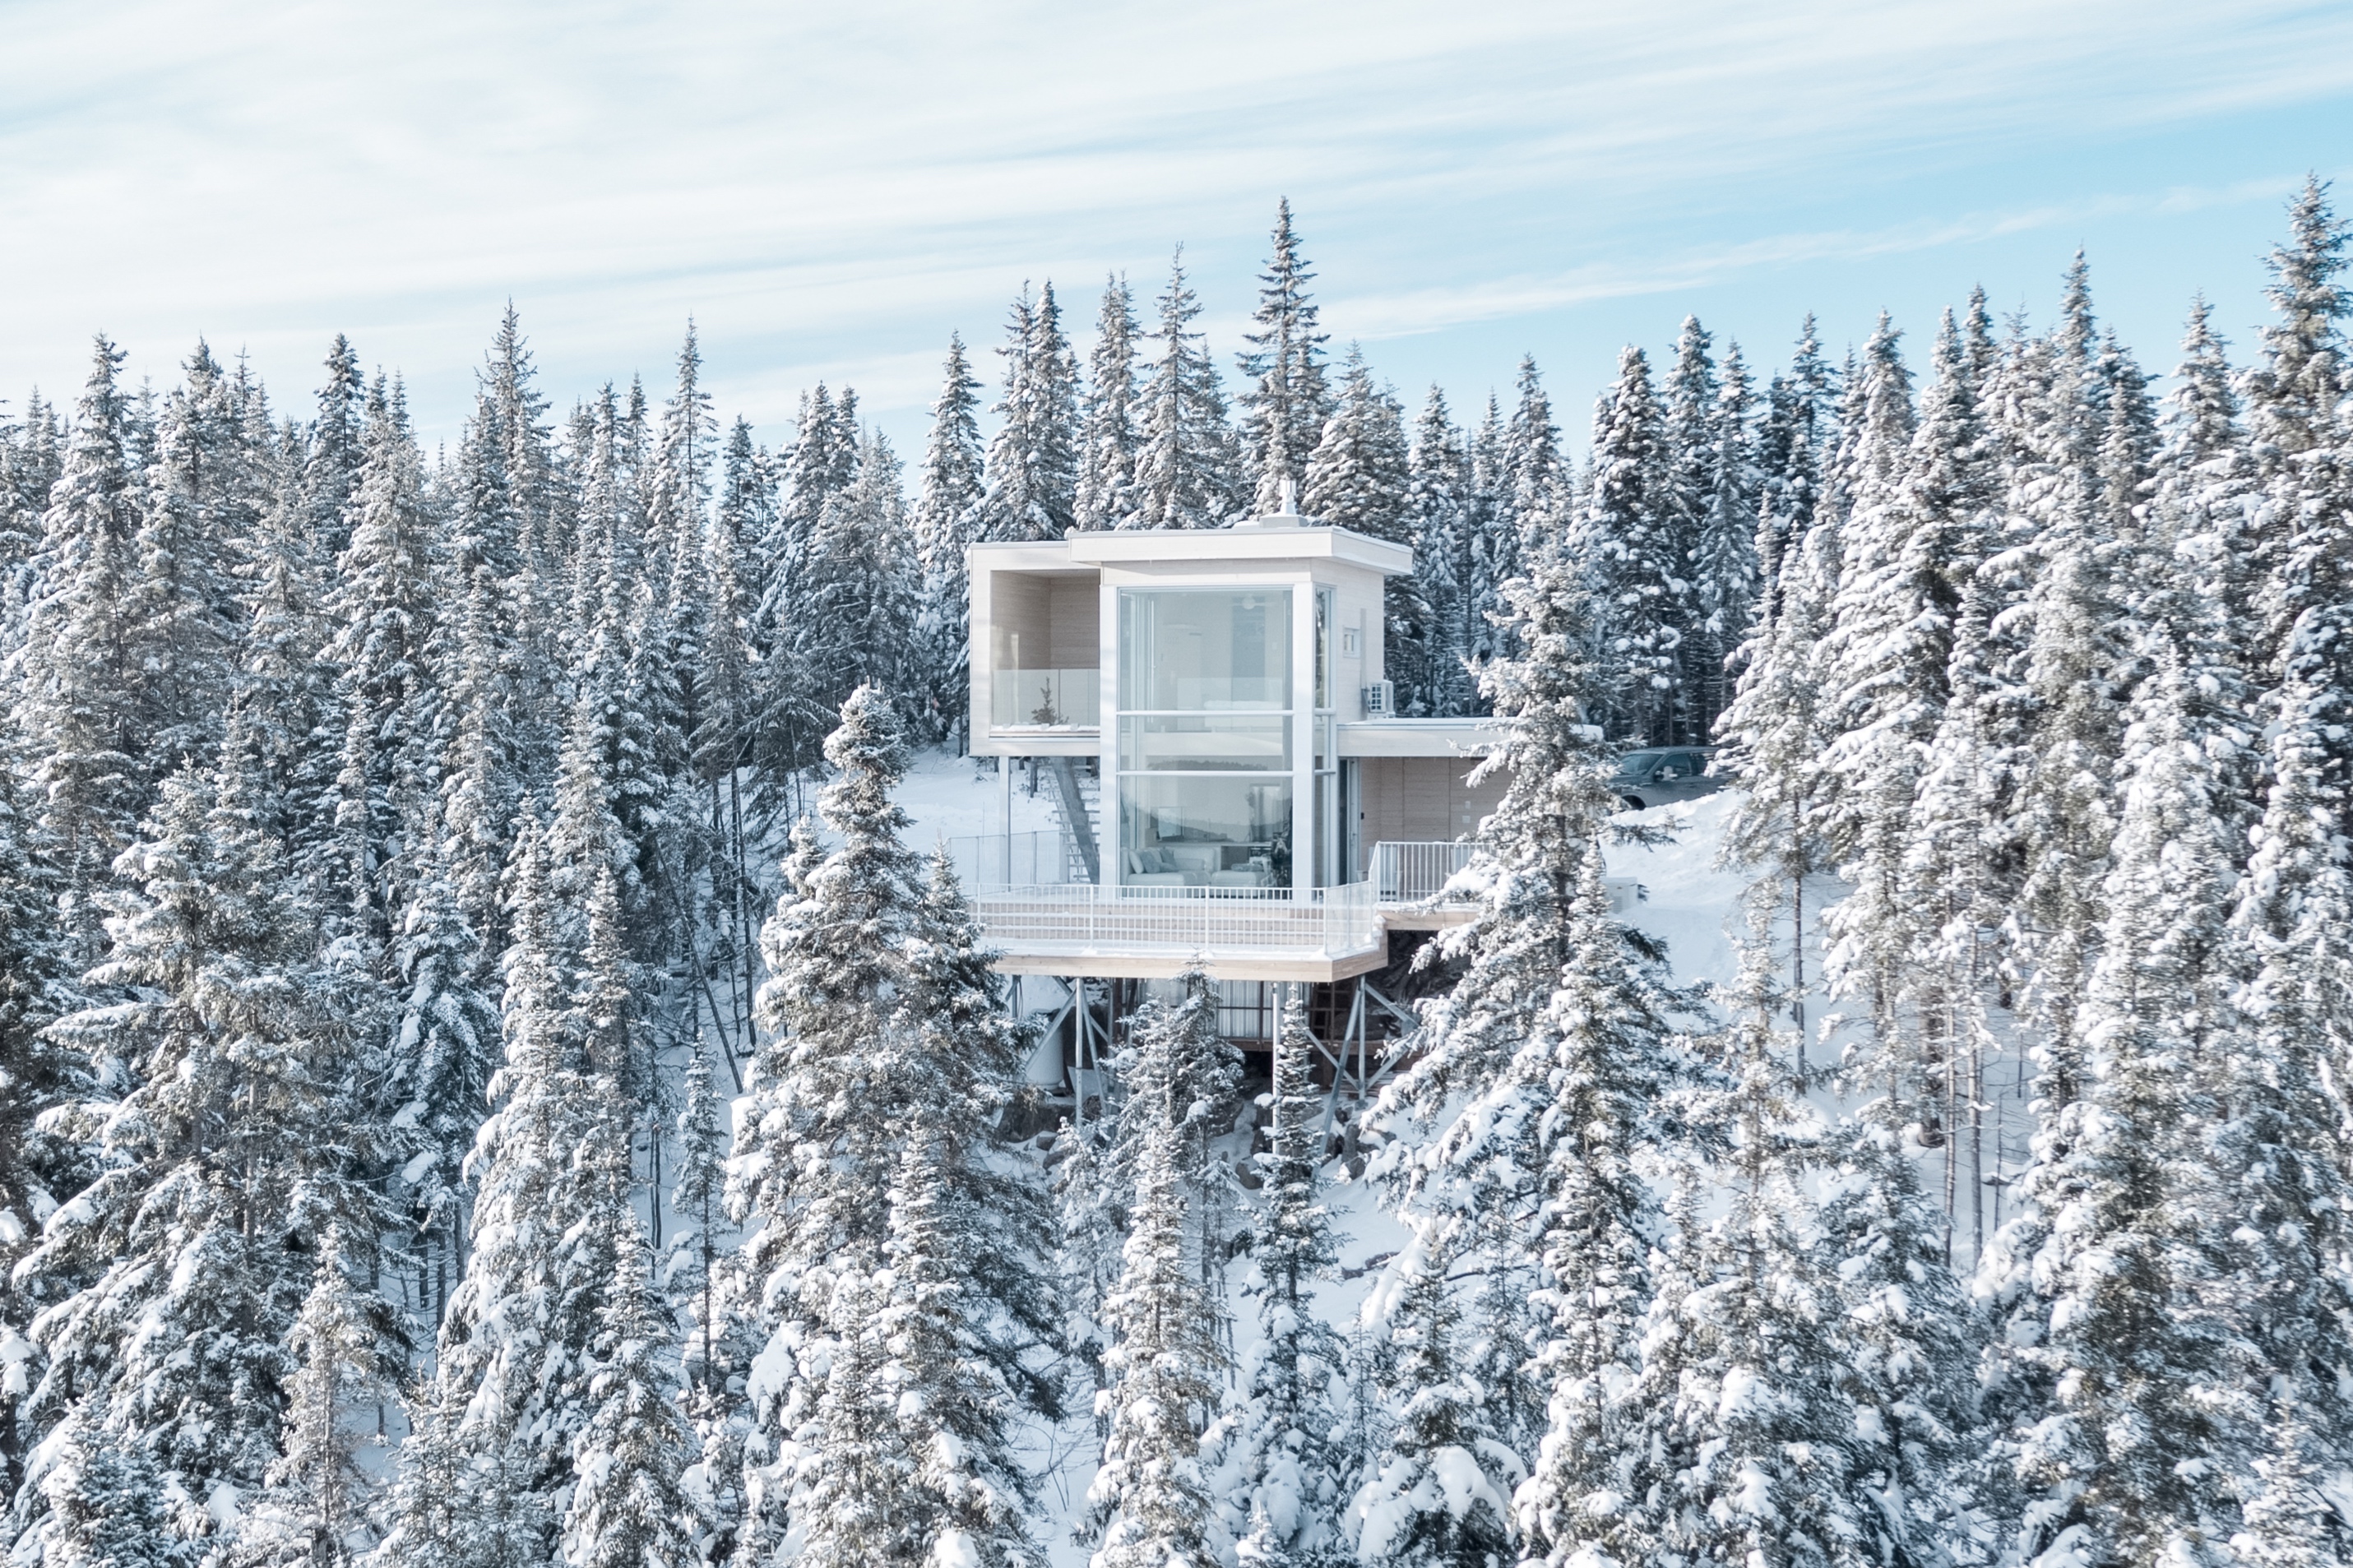 A snow-capped forest with a while cube-designed home. 